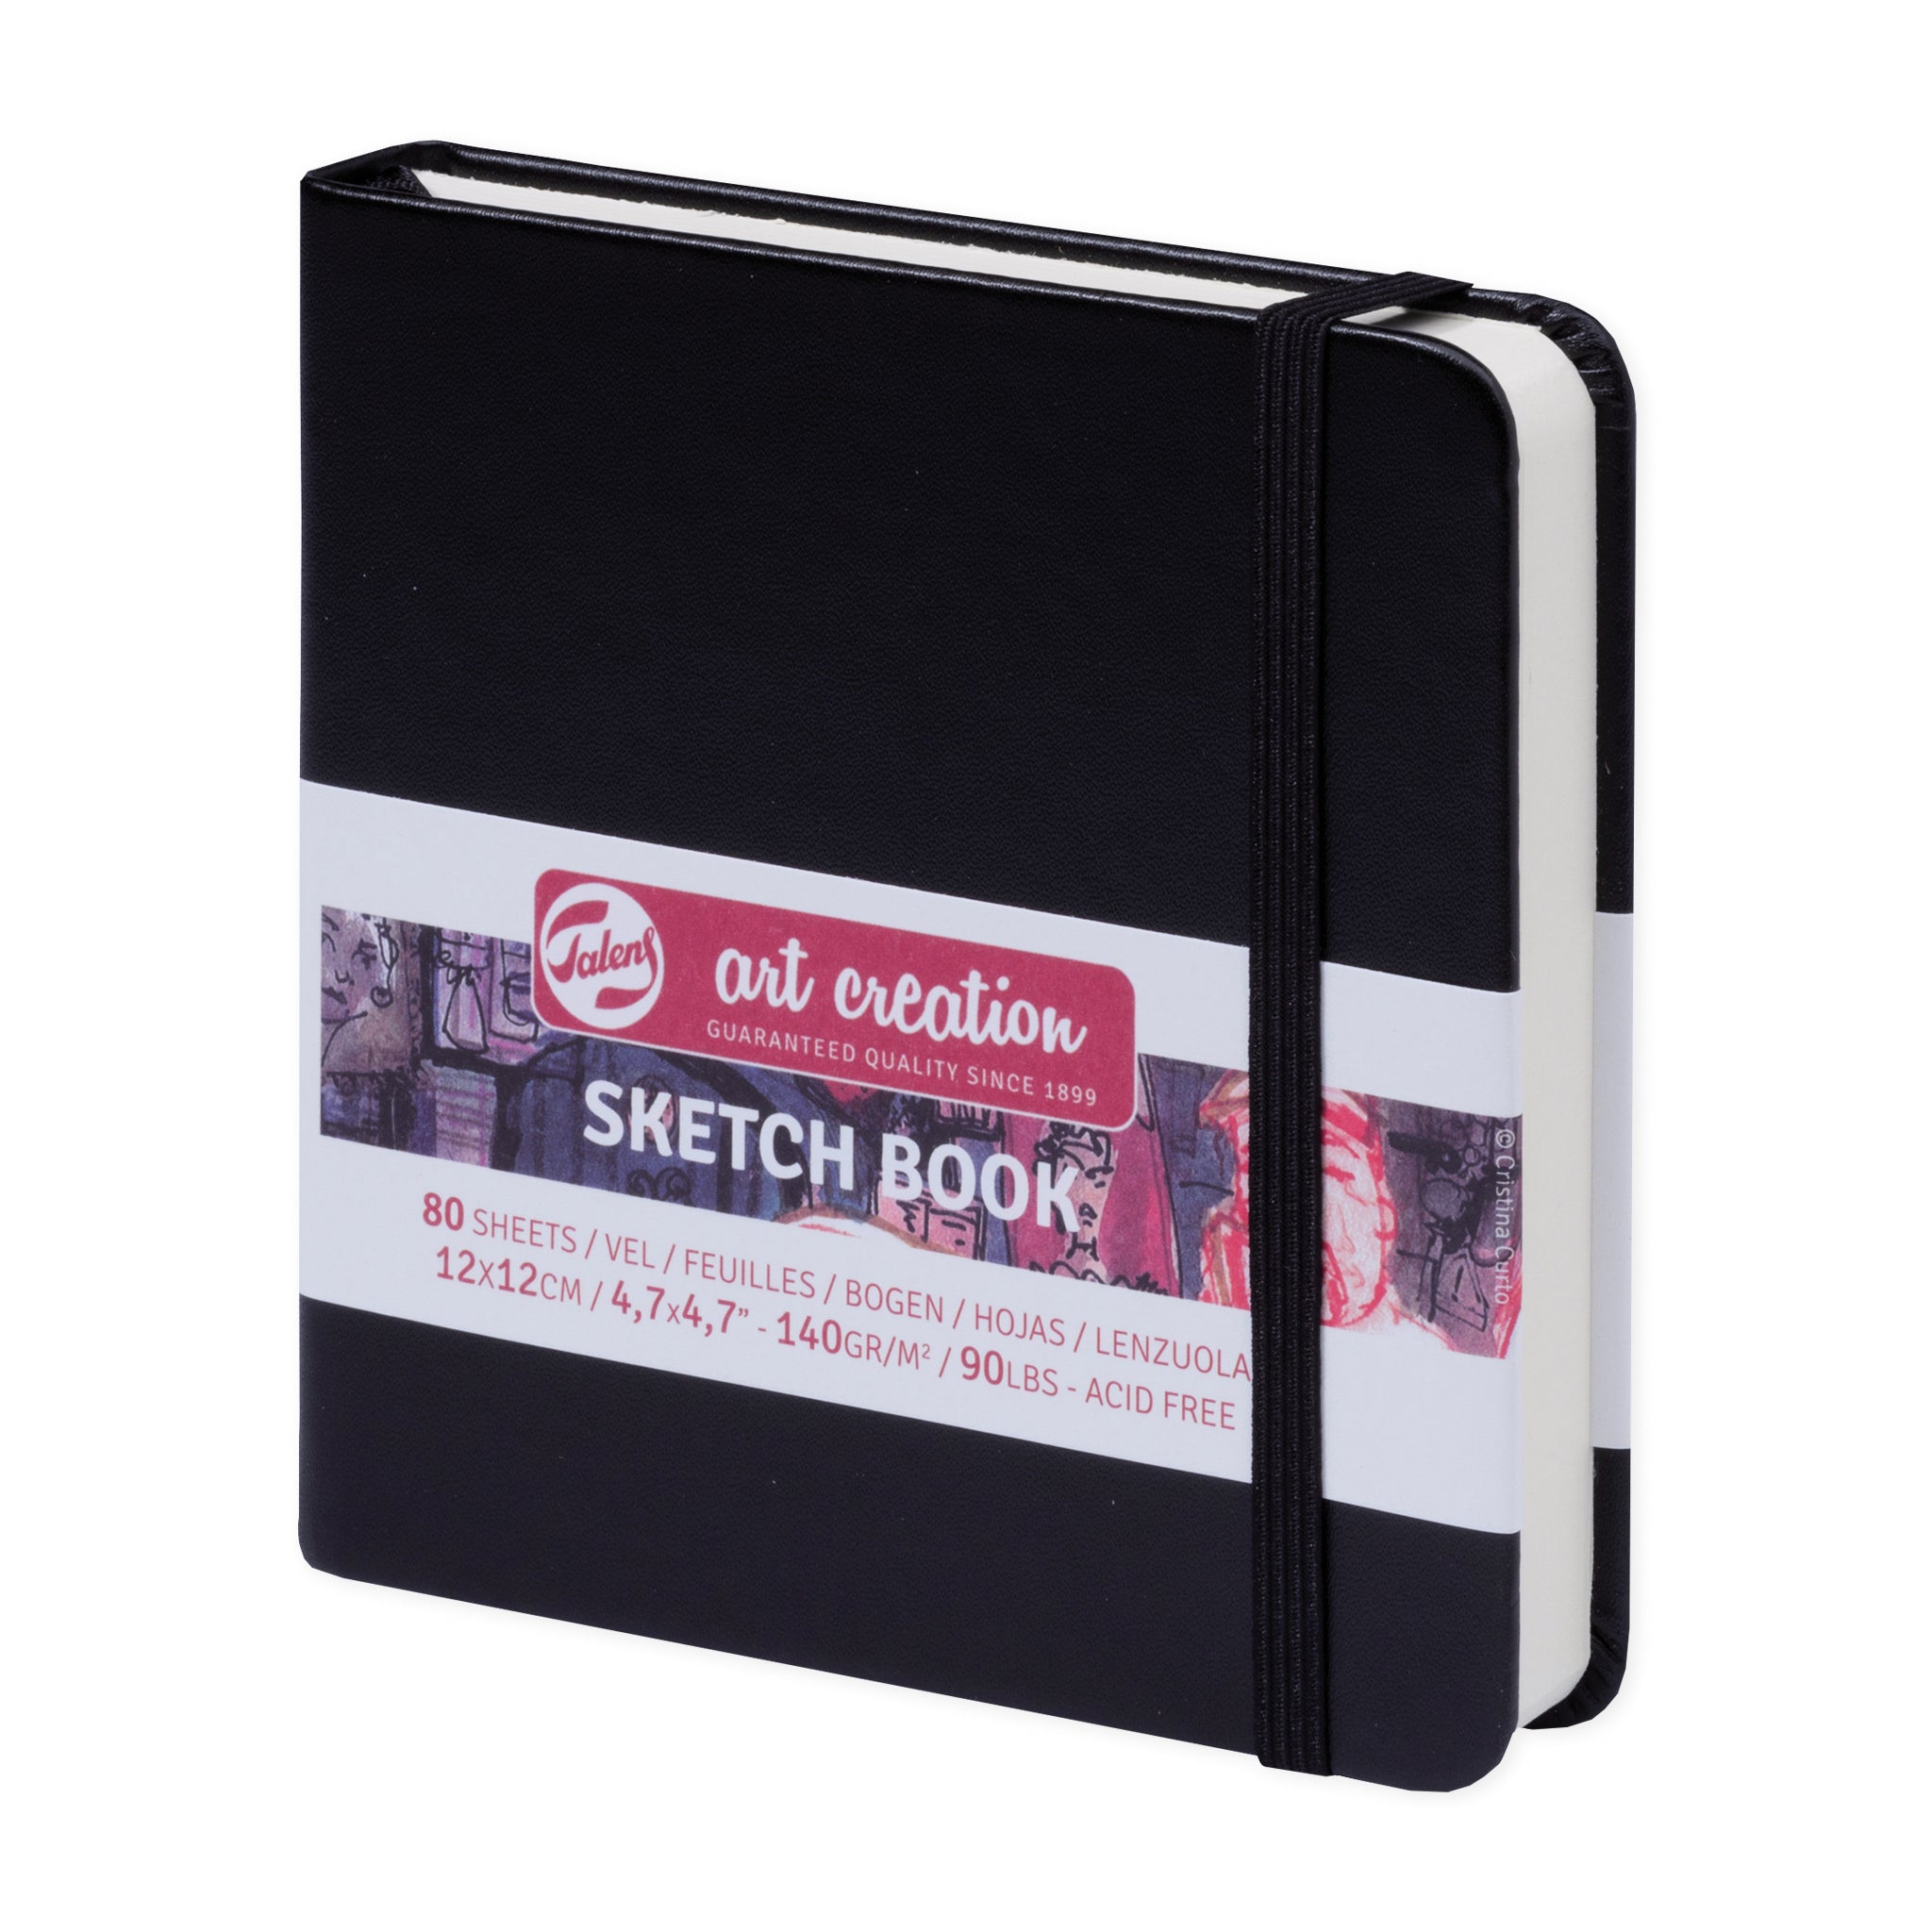 Peach Paradise Sketchbook - Extra Large  Sketch book, Stationery paper, Drawing  pad